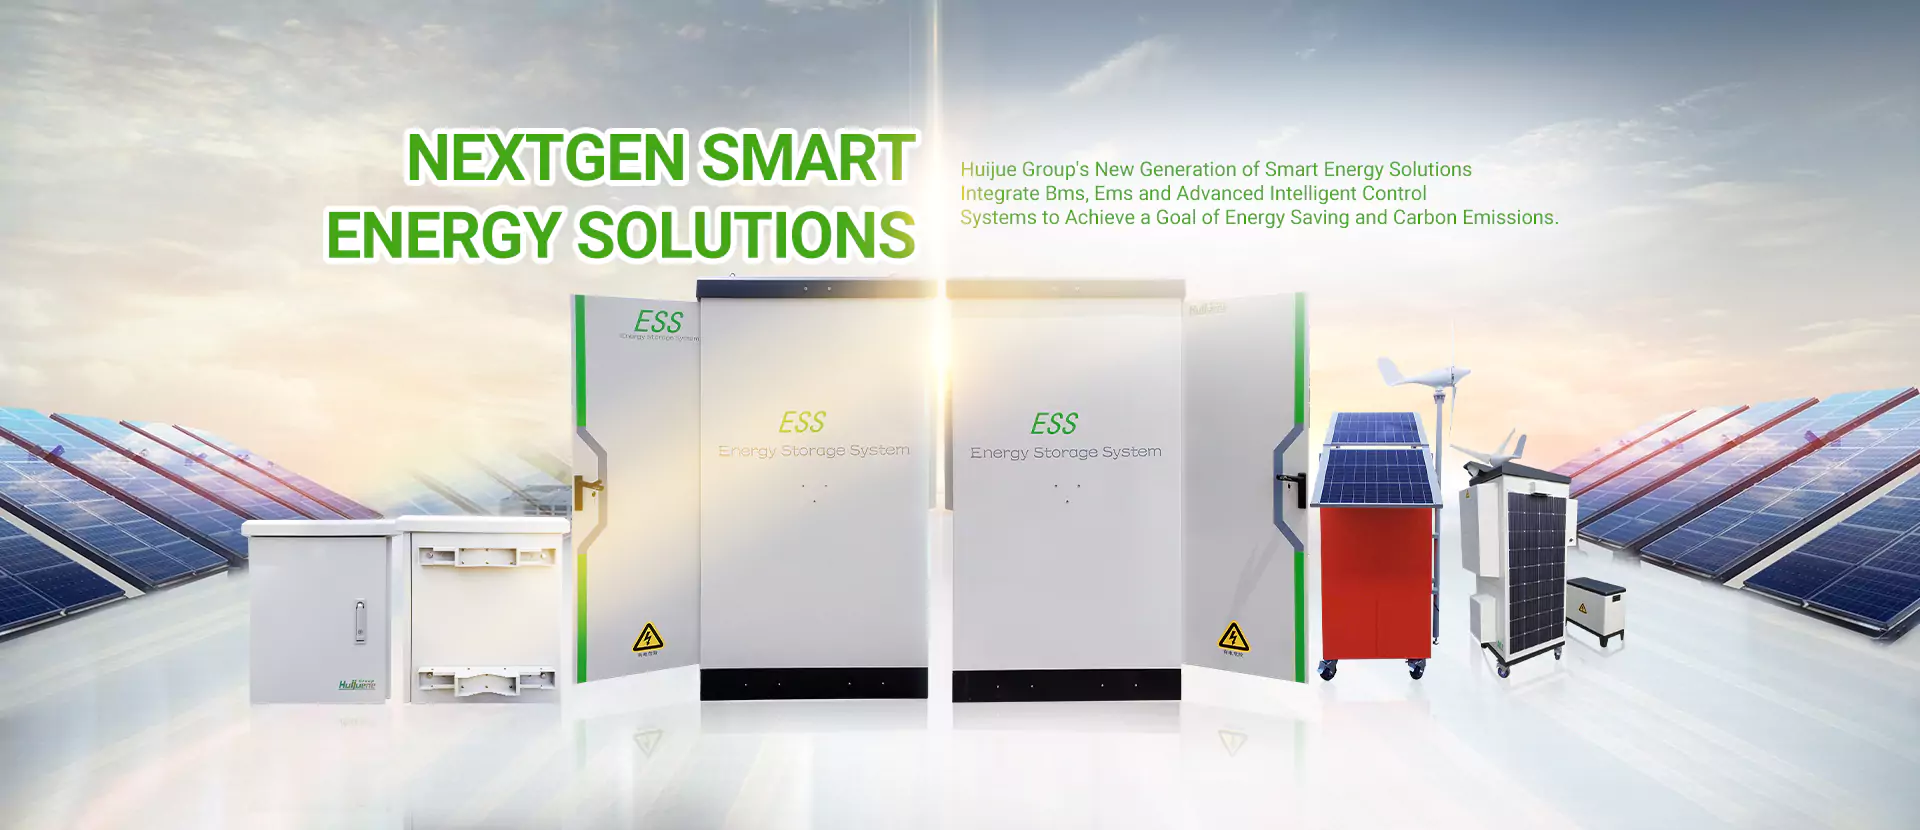 Photovoltaic and energy storage, microgrid solutions